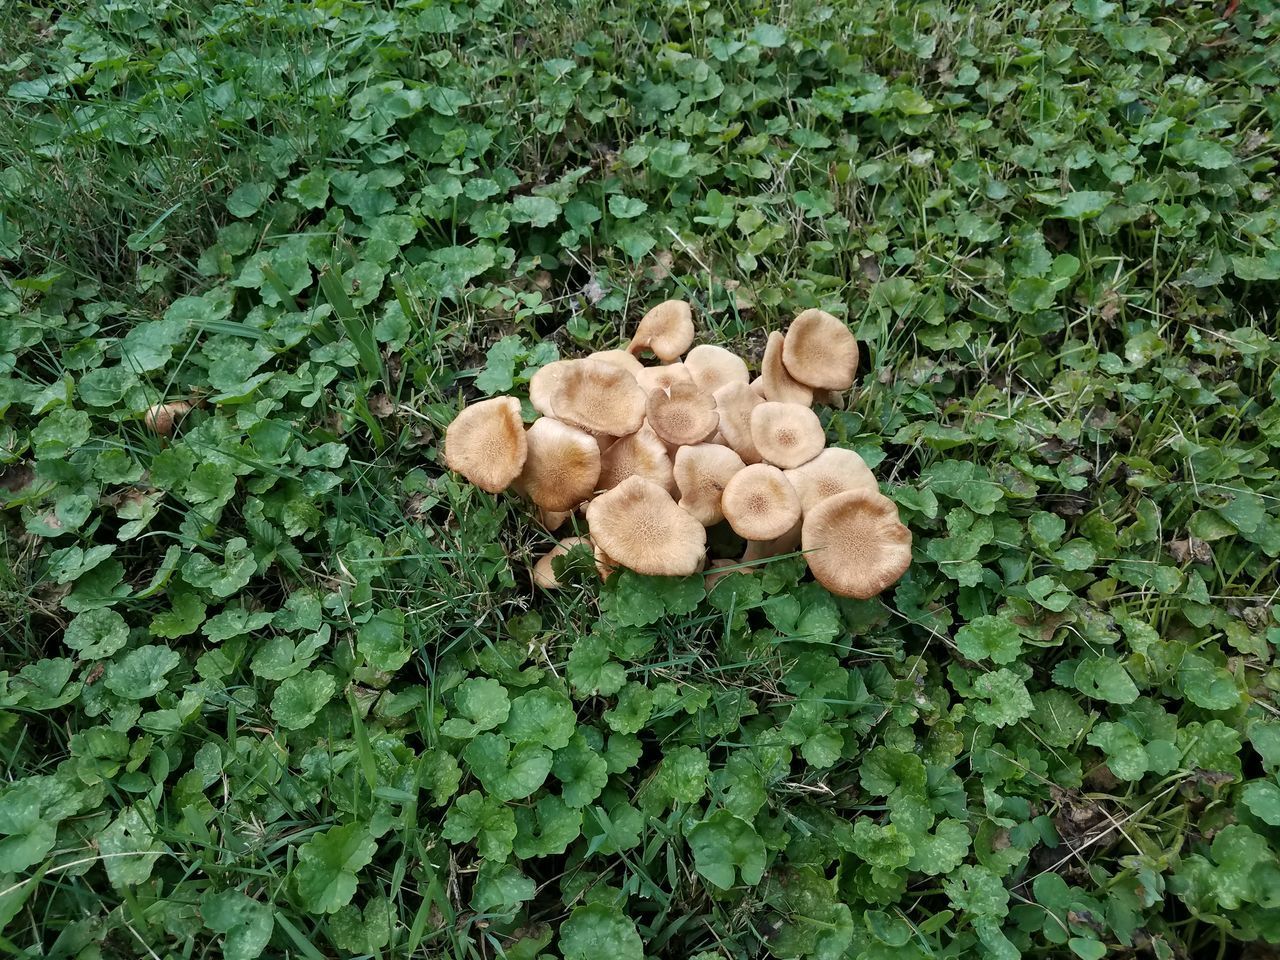 HIGH ANGLE VIEW OF MUSHROOMS ON PLANT